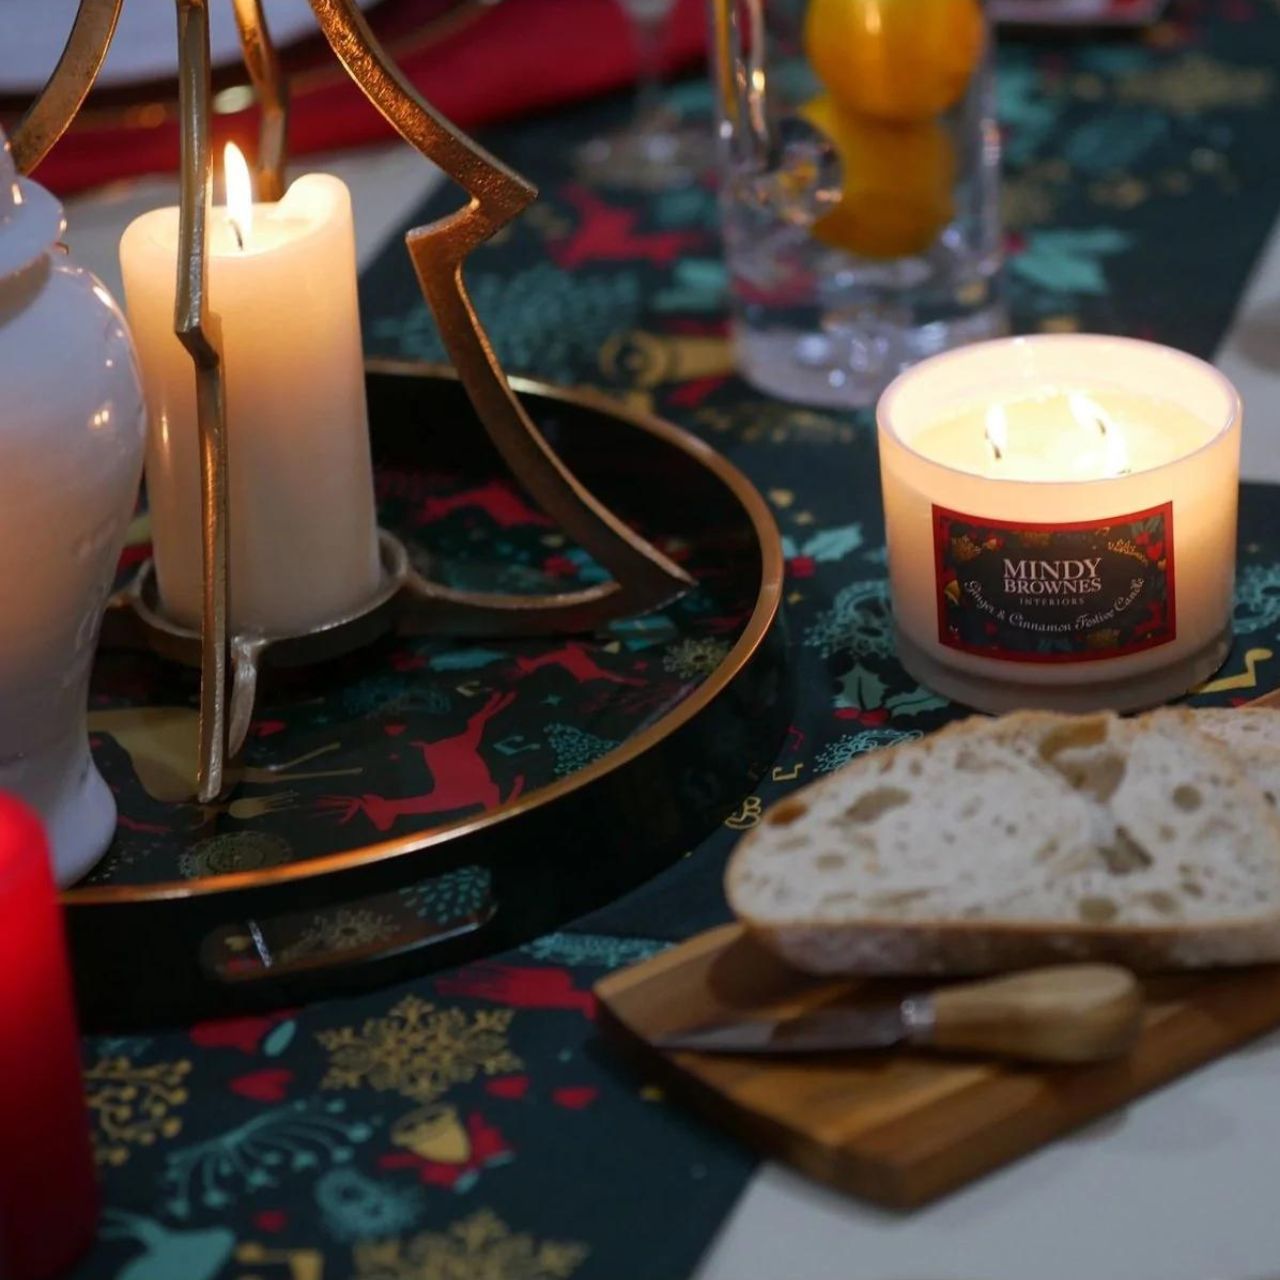 A Christmas Wish Tray by Mindy Brownes Interiors  A stunning circular tray, with a rich green surround, gold rim, and a Christmas design that features some of Christmas' key elements, such as reindeer, presents, music notes and more. An ideal styling accessory this Christmas season.